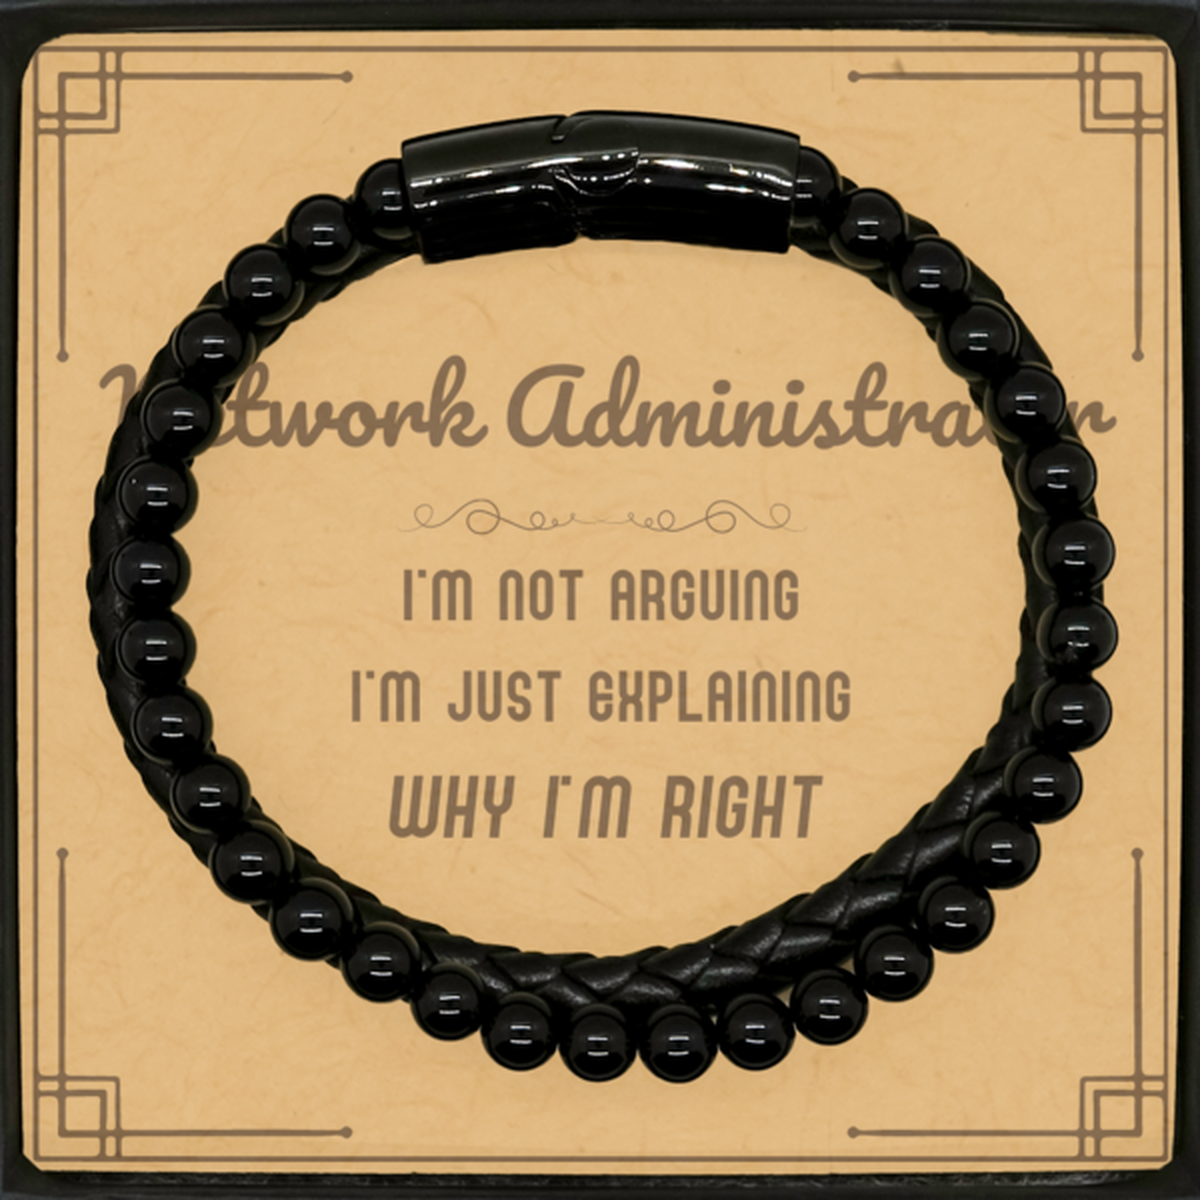 Network Administrator I'm not Arguing. I'm Just Explaining Why I'm RIGHT Stone Leather Bracelets, Funny Saying Quote Network Administrator Gifts For Network Administrator Message Card Graduation Birthday Christmas Gifts for Men Women Coworker